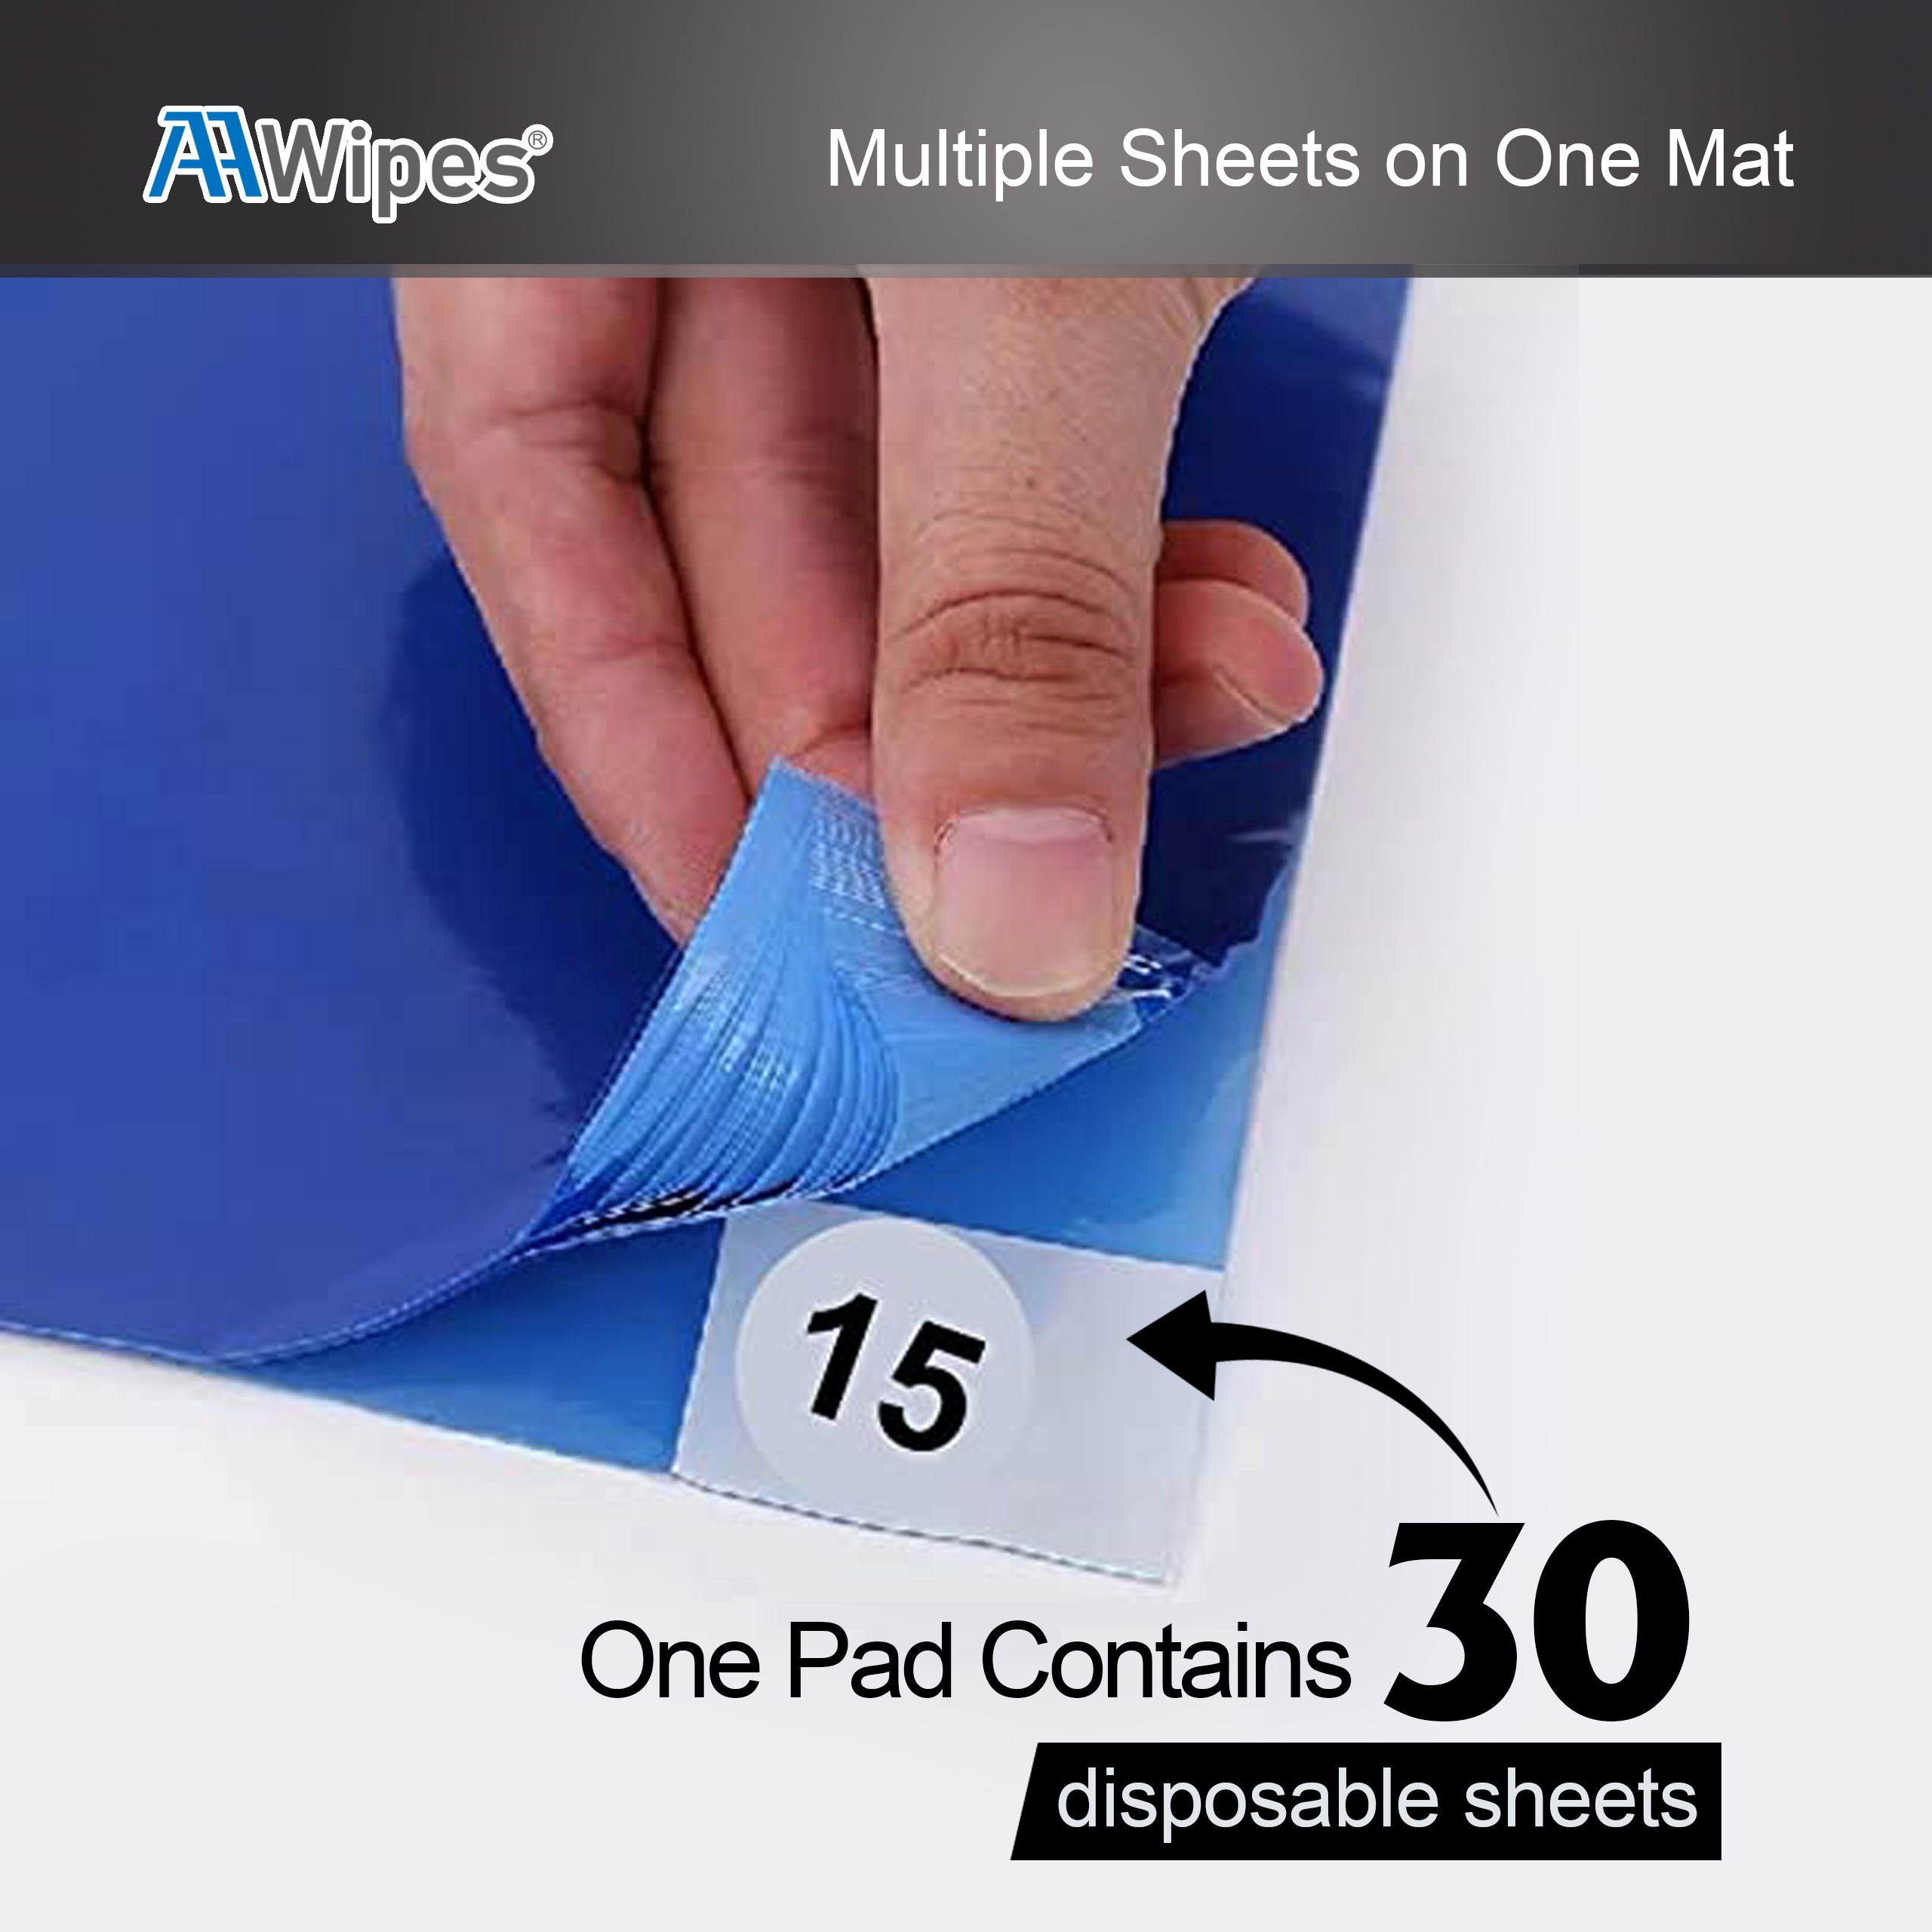 Cleanroom Sticky Floor Mats 18X36 Blue for Pharmaceuticals,Food  Processing, Hospital, Lab, Biotechnology, Automotive, Construction, Health  Care